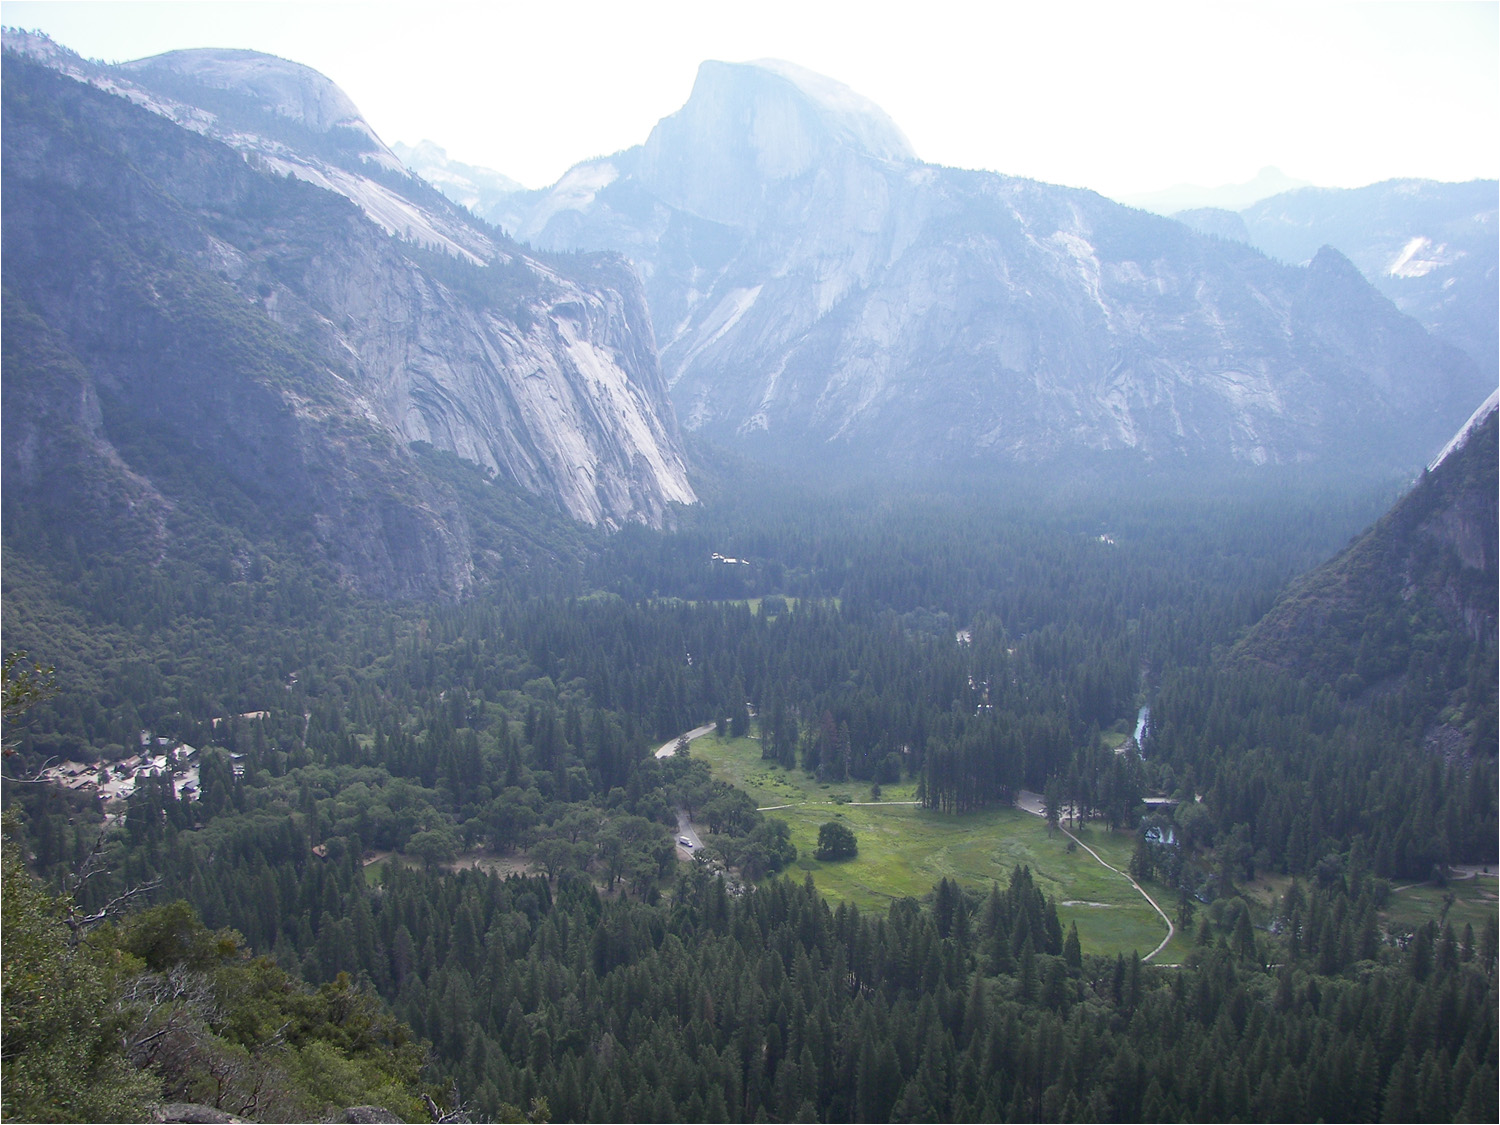 Upper Yosemite Falls Hike- View of Half Dome and Yosemite Valley from trail